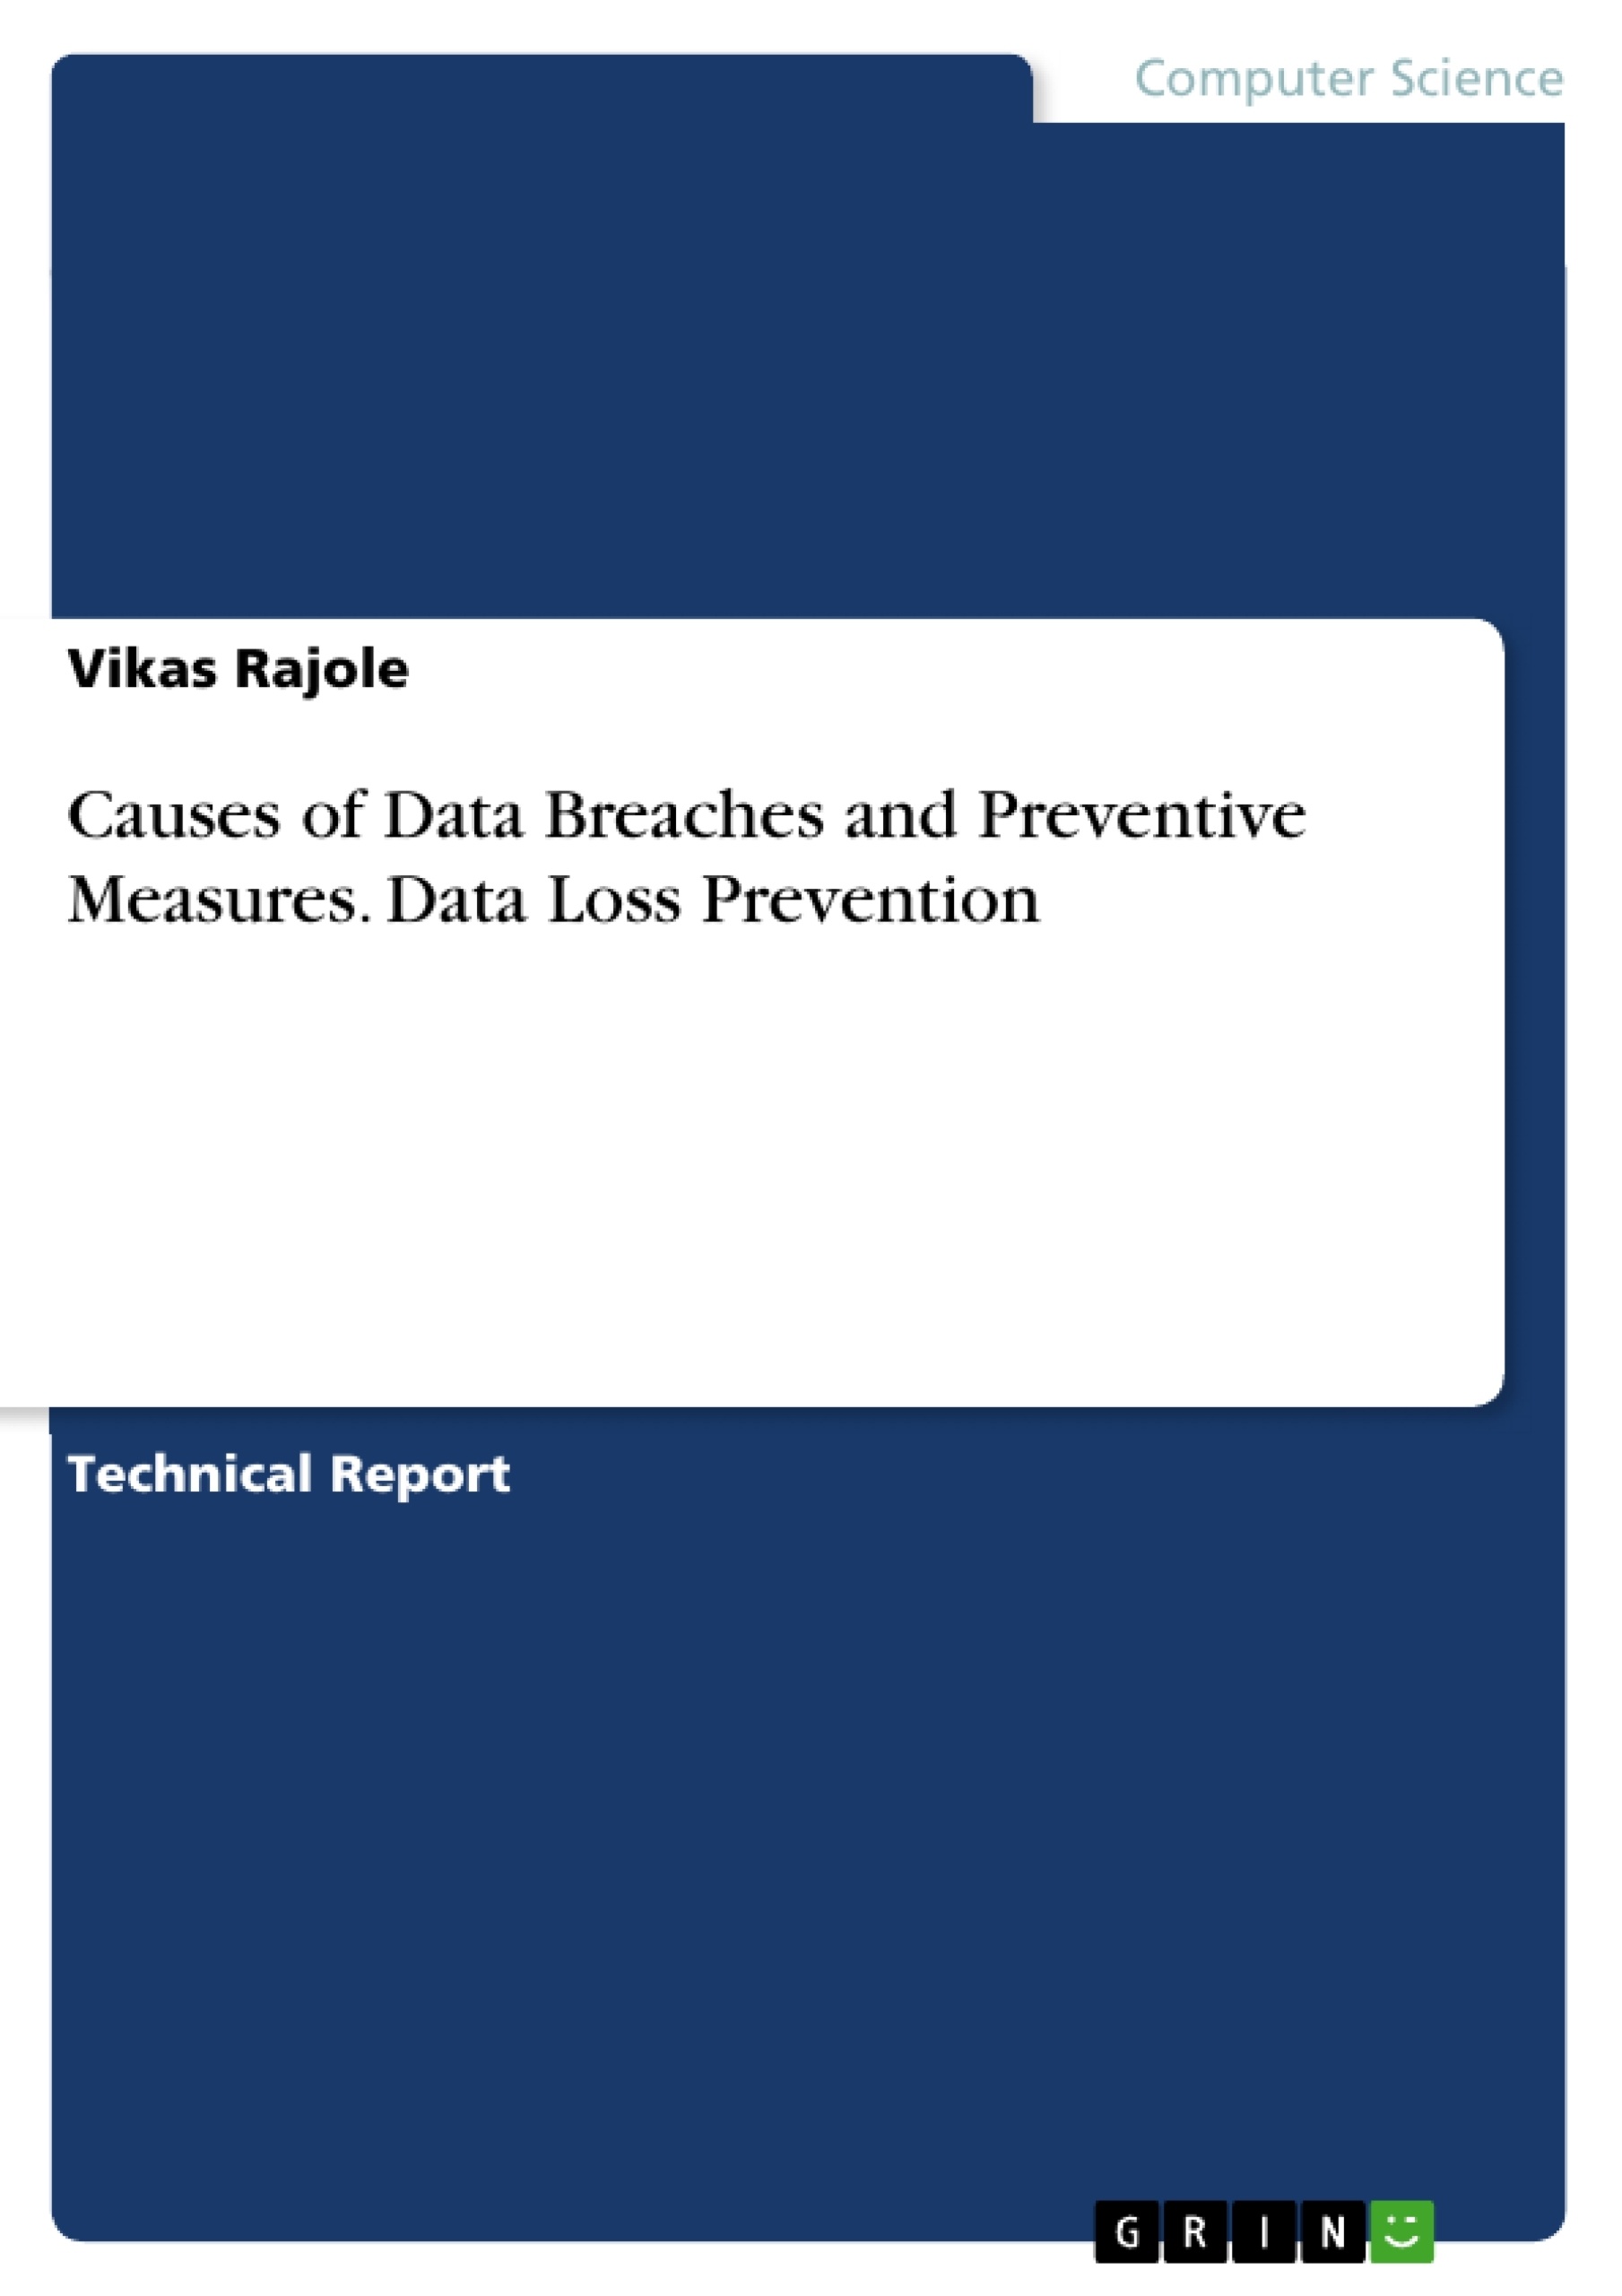 Titre: Causes of Data Breaches and Preventive Measures. Data Loss Prevention